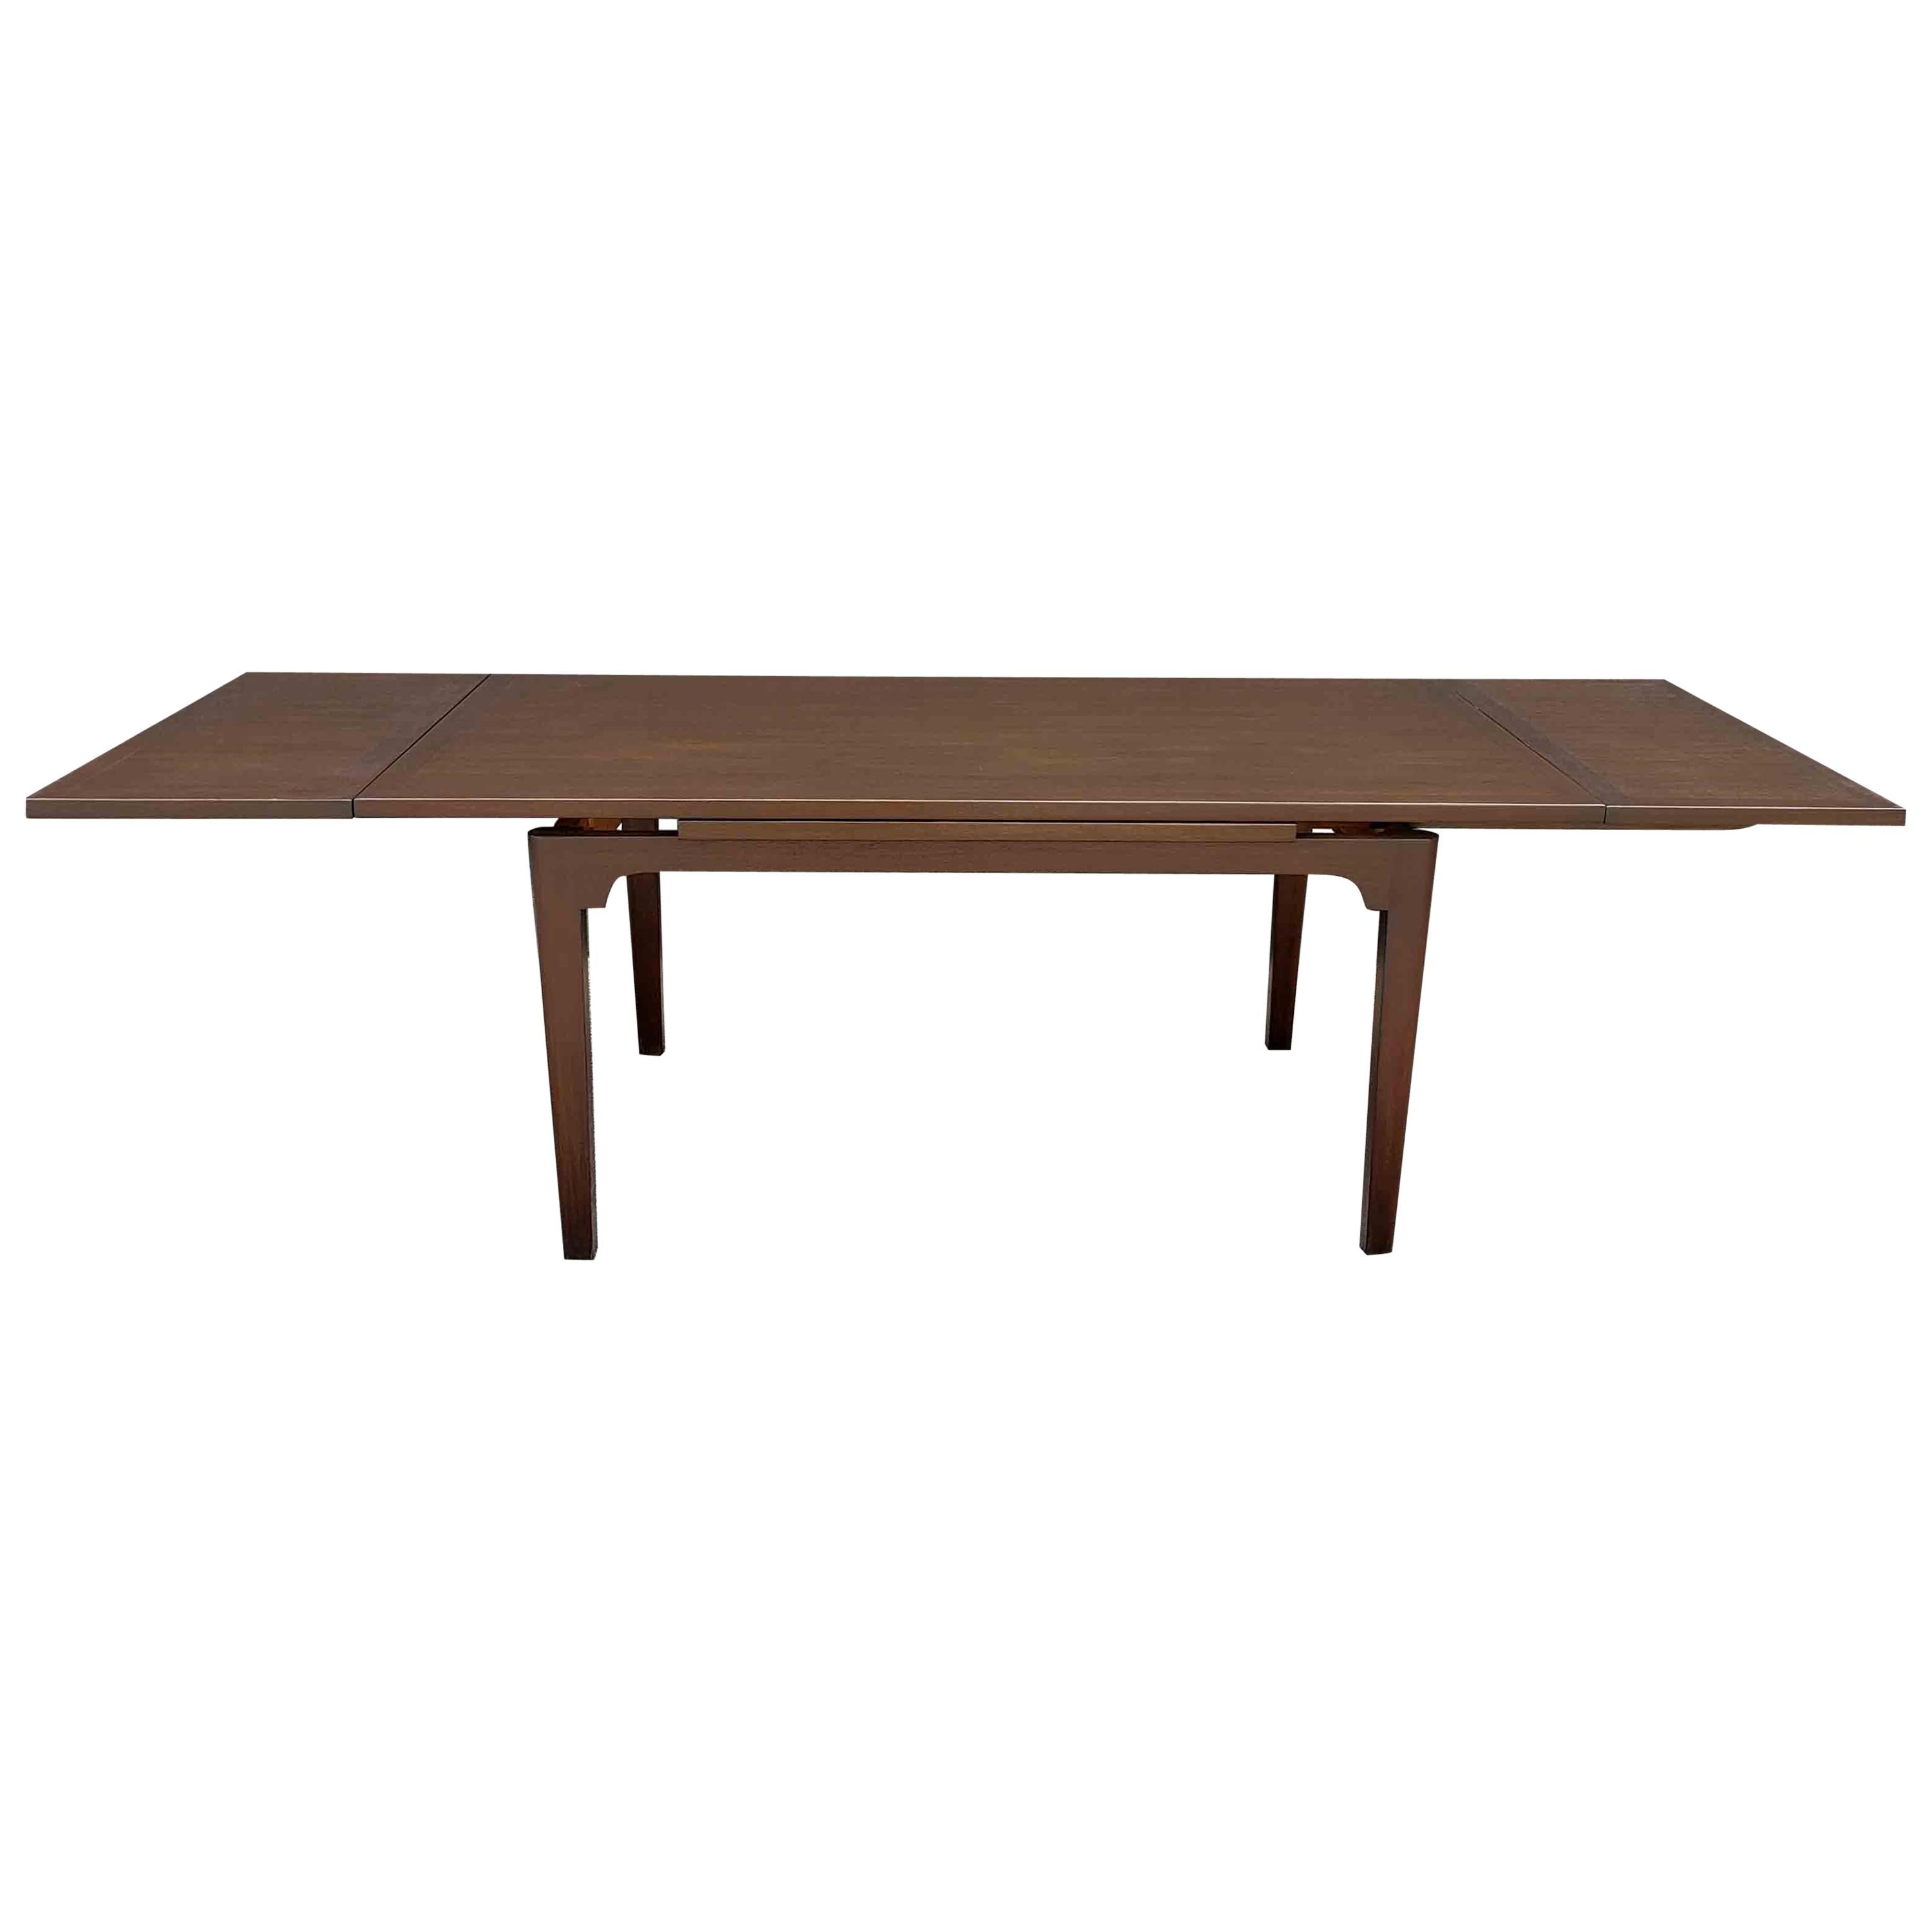 Dunbar Dining Table by Edward Wormley with Retractable Leaves Mahogany, 1950s